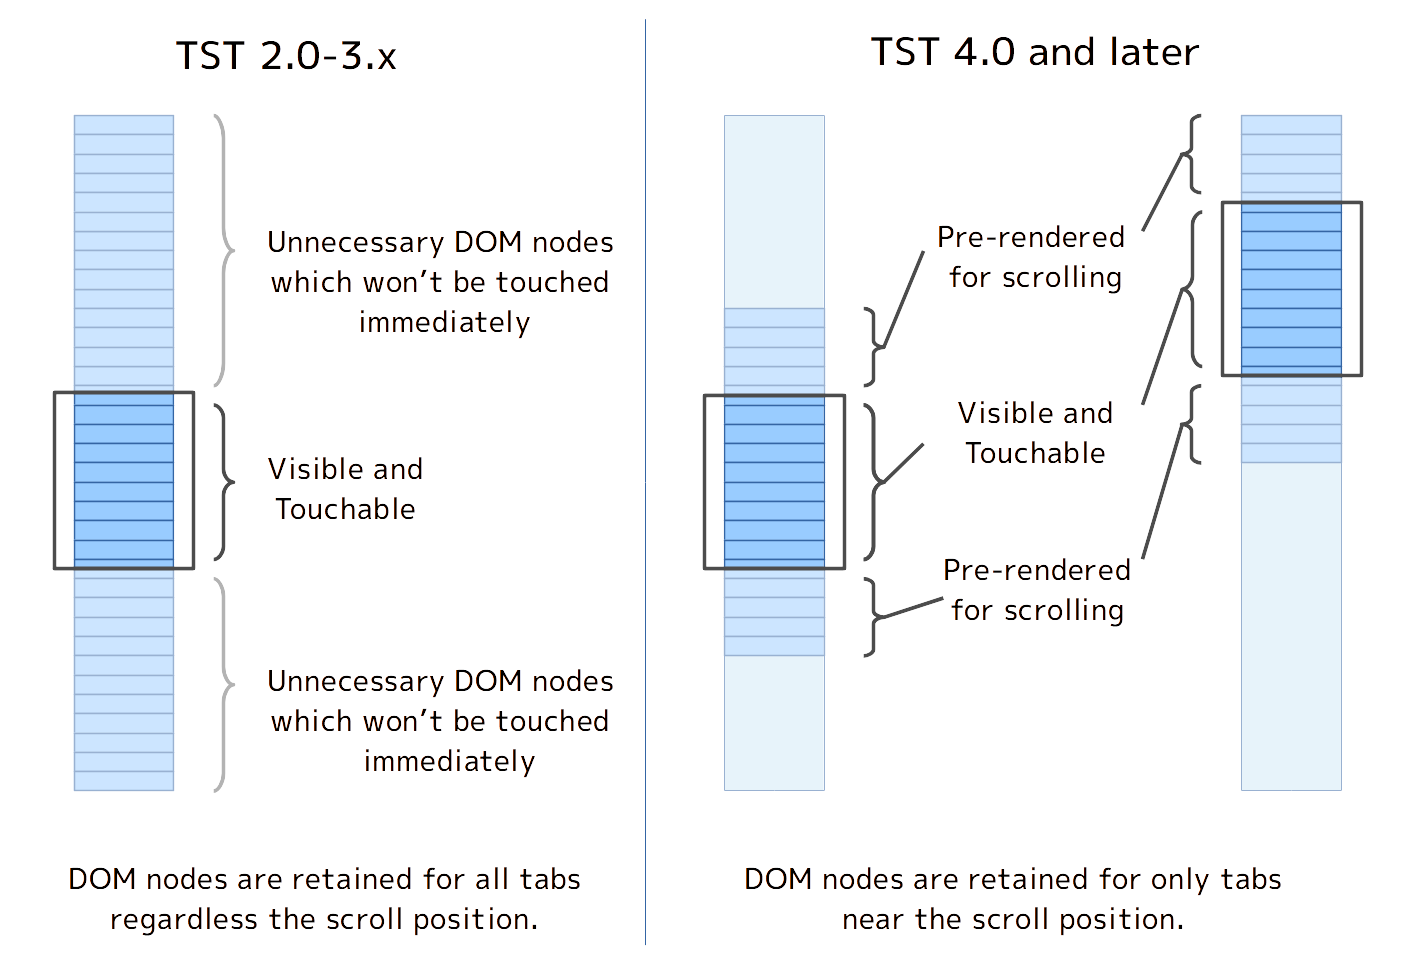 (fig: Comparison of DOM structure of TST 3.x- vs TST 4.0+ (and later). Previous versions held all DOM nodes for each tab including those out of the viewport, but new version holds only a limited number of DOM nodes.)